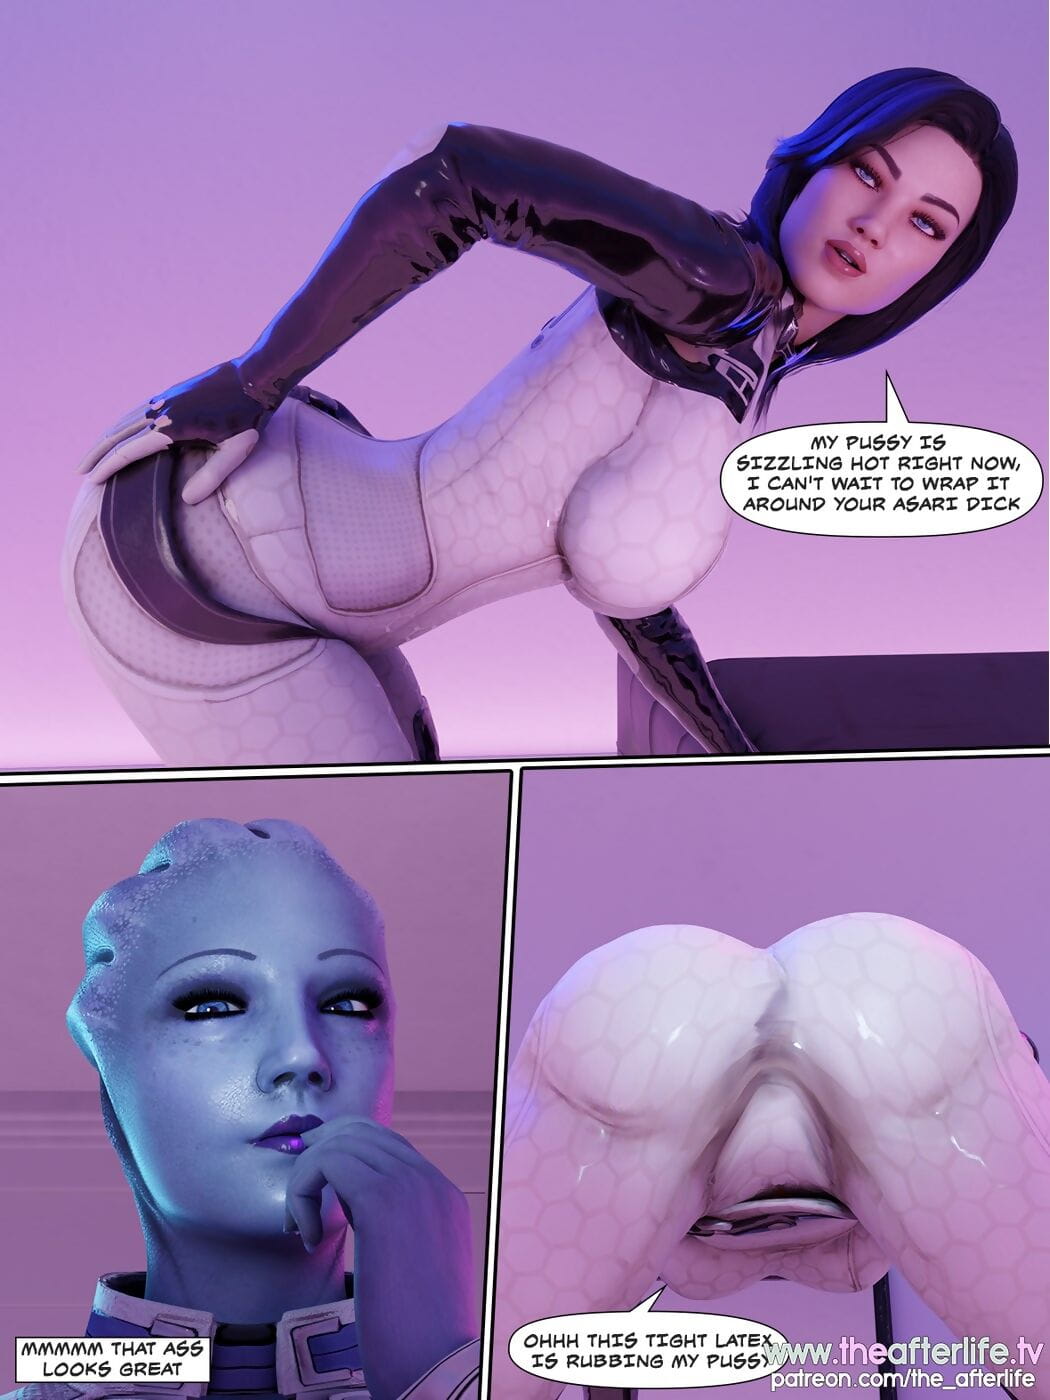 Theafterlife- Liara and Mirandas Night Off page 1